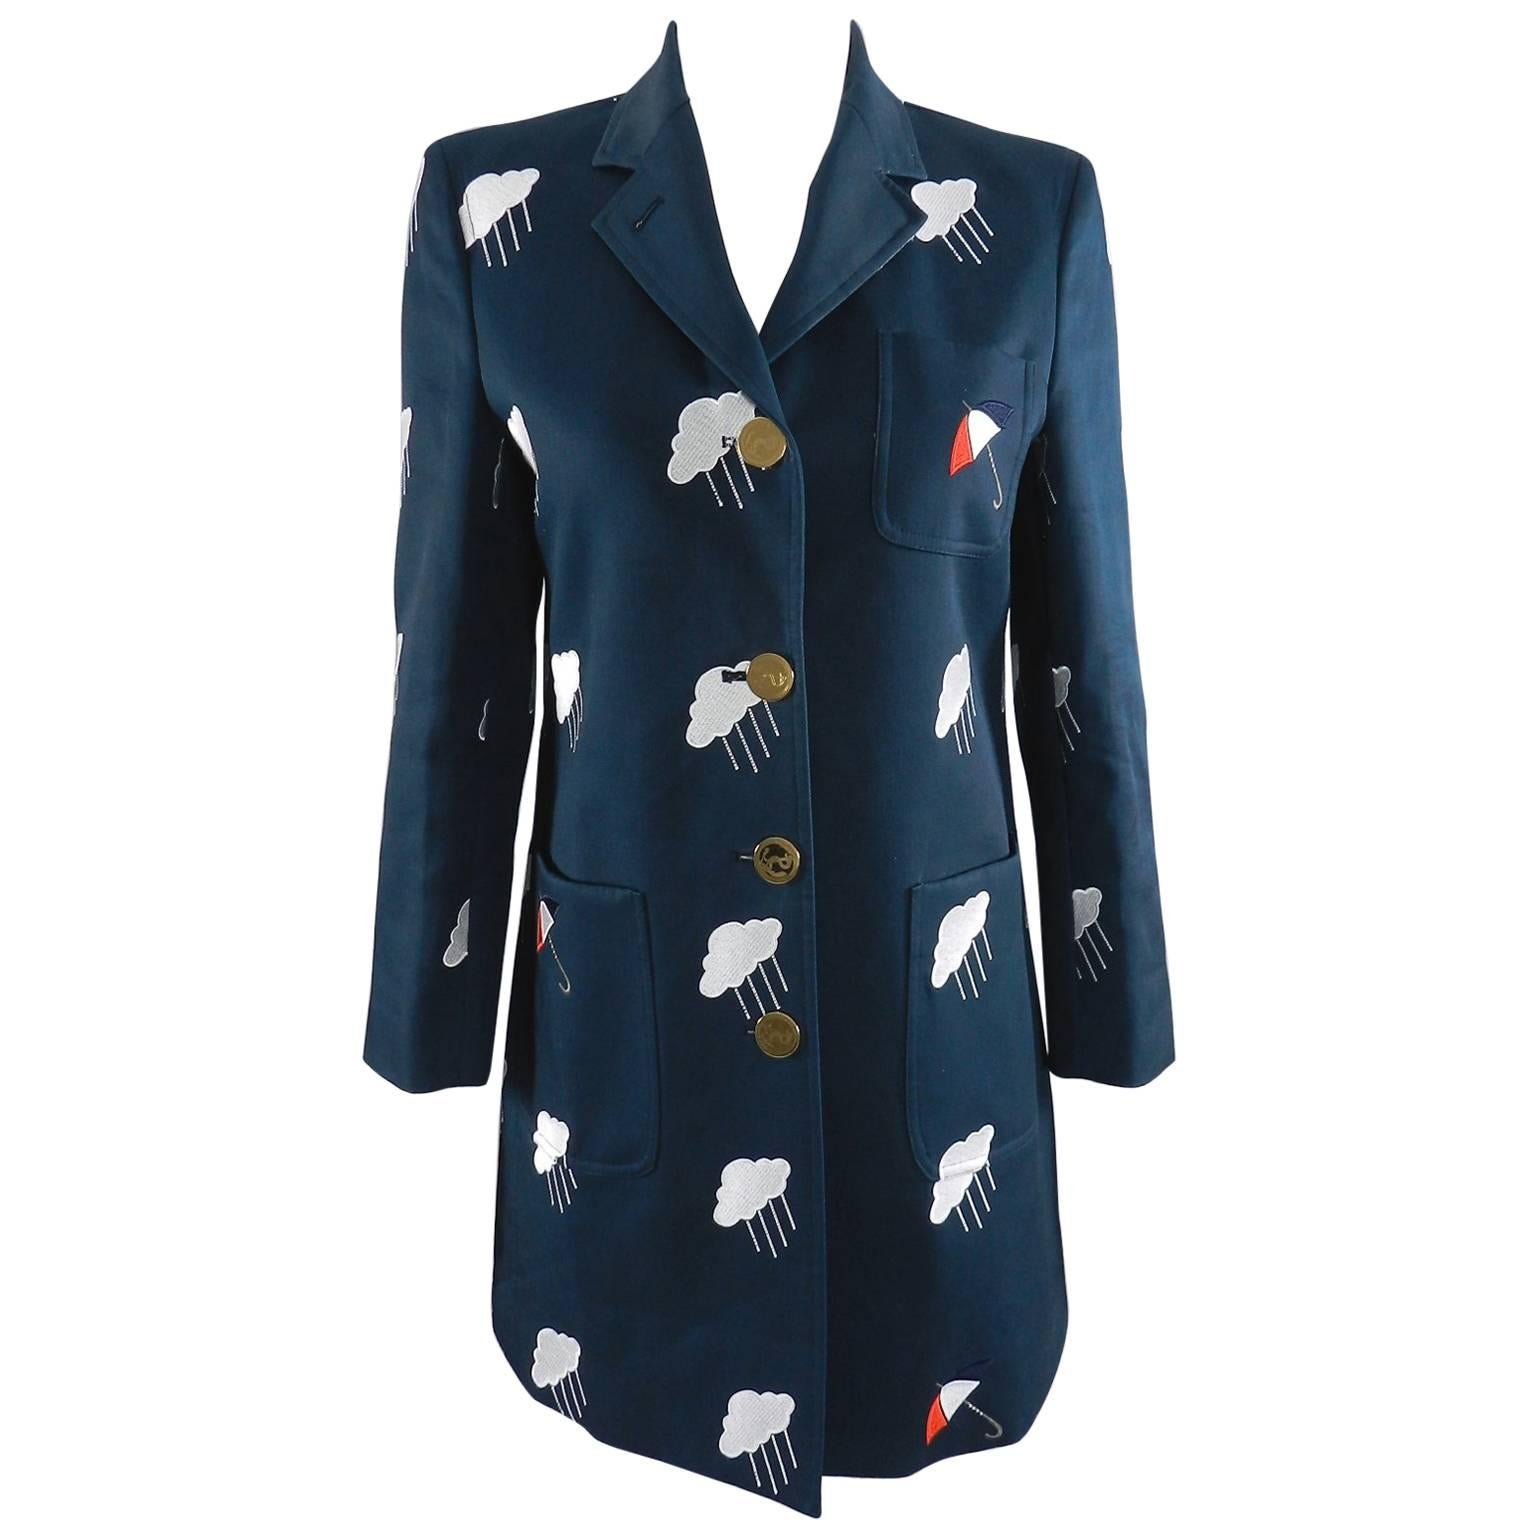 Thom Browne Navy Embroidered Coat with Umbrellas and Clouds